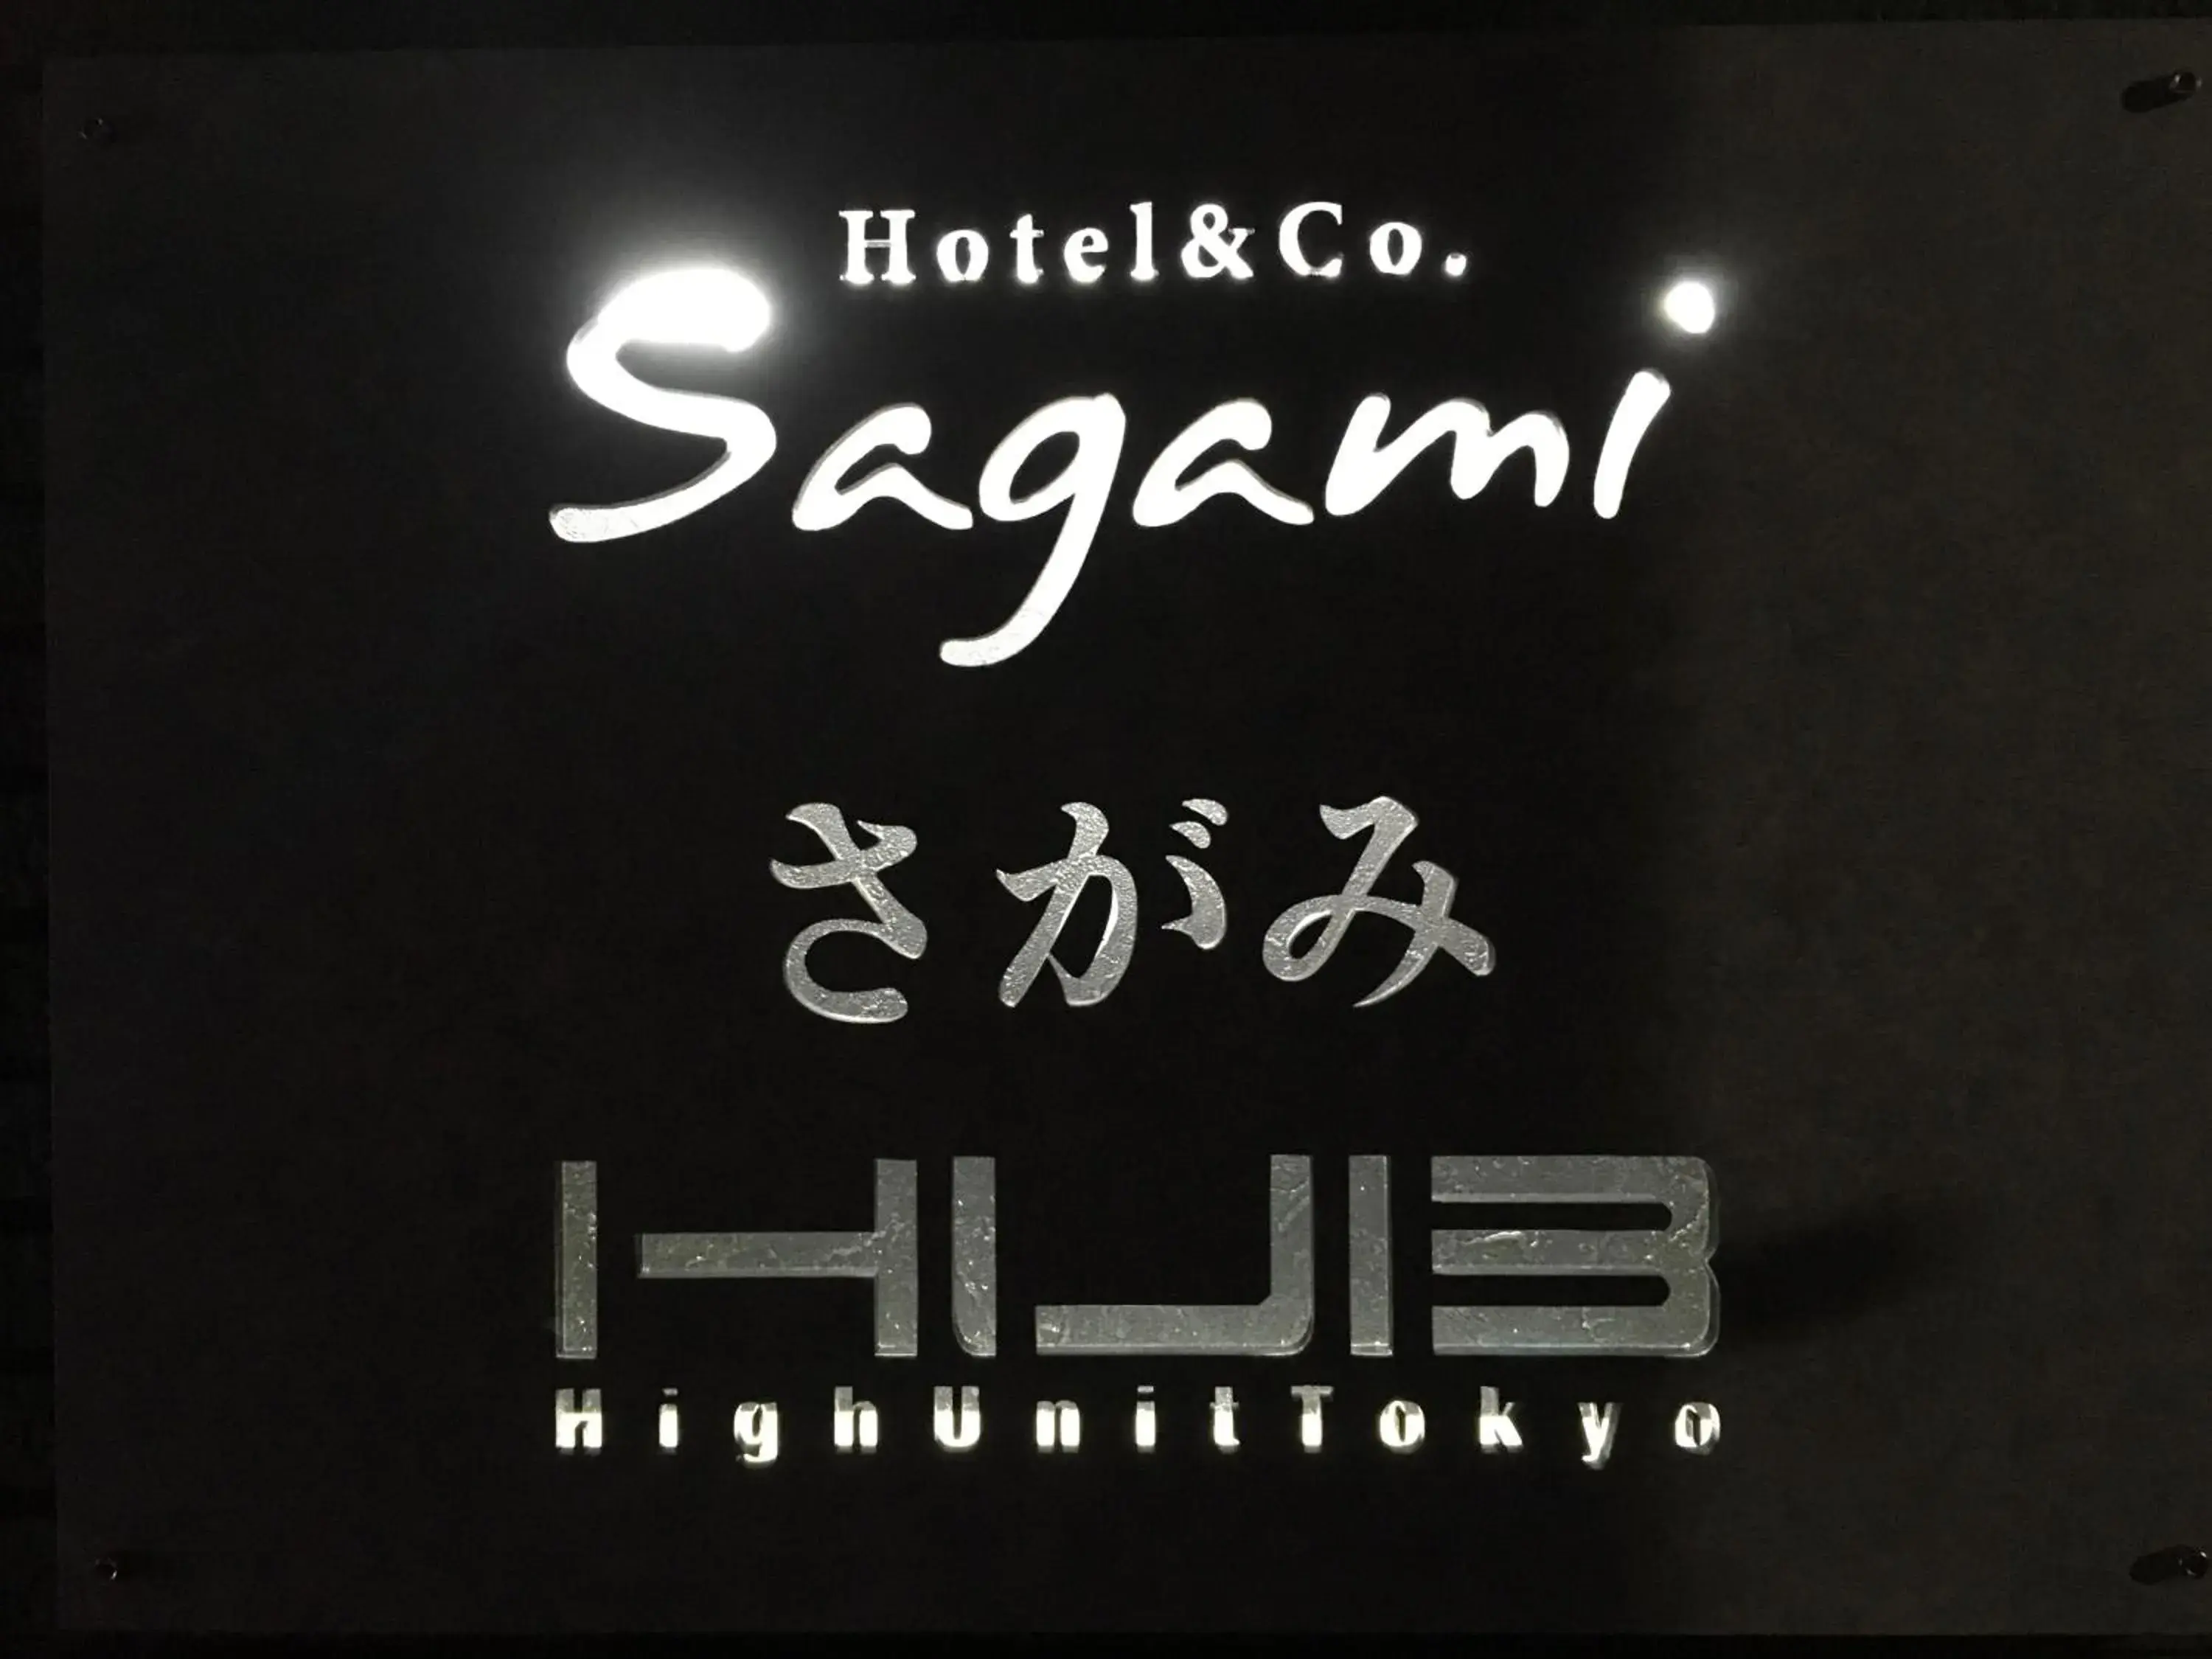 Property logo or sign in Hotel&Co. Sagami